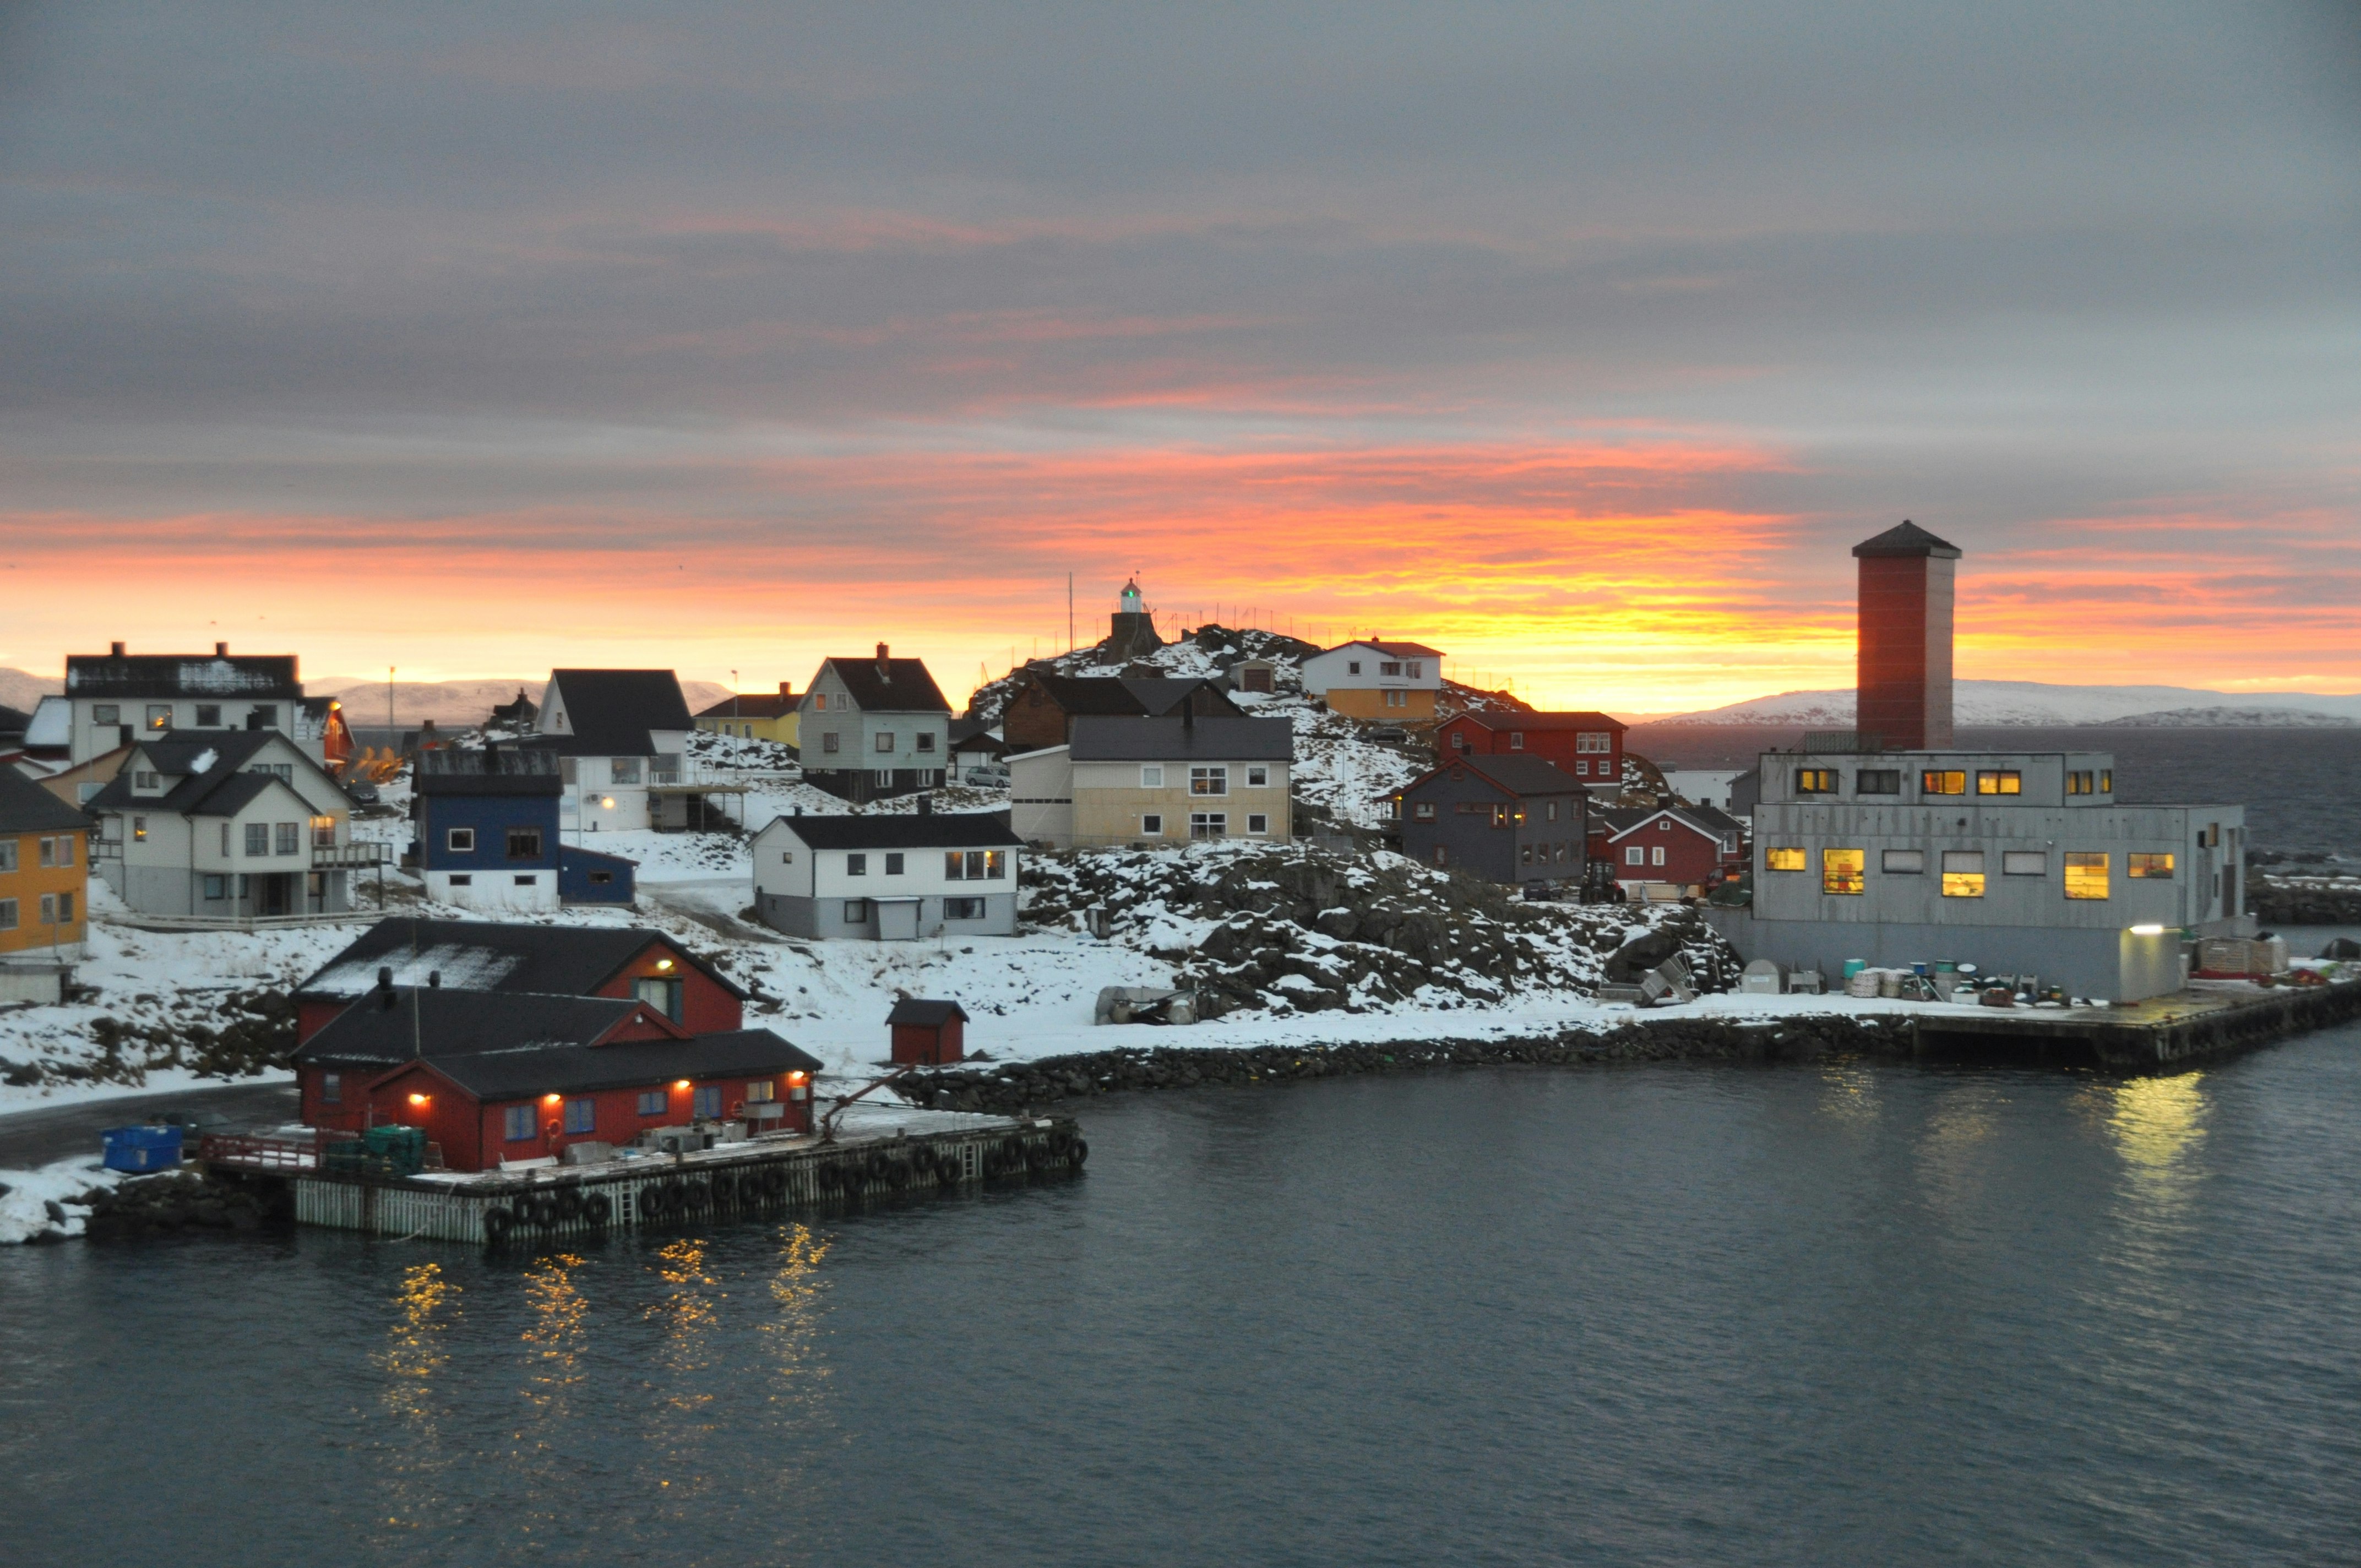 The port of a small coastal town in Norway. It's approaching sunset, and the sky near the horizon has a blazing orange glow, while there is sno dusting the buildings and ground in the town.